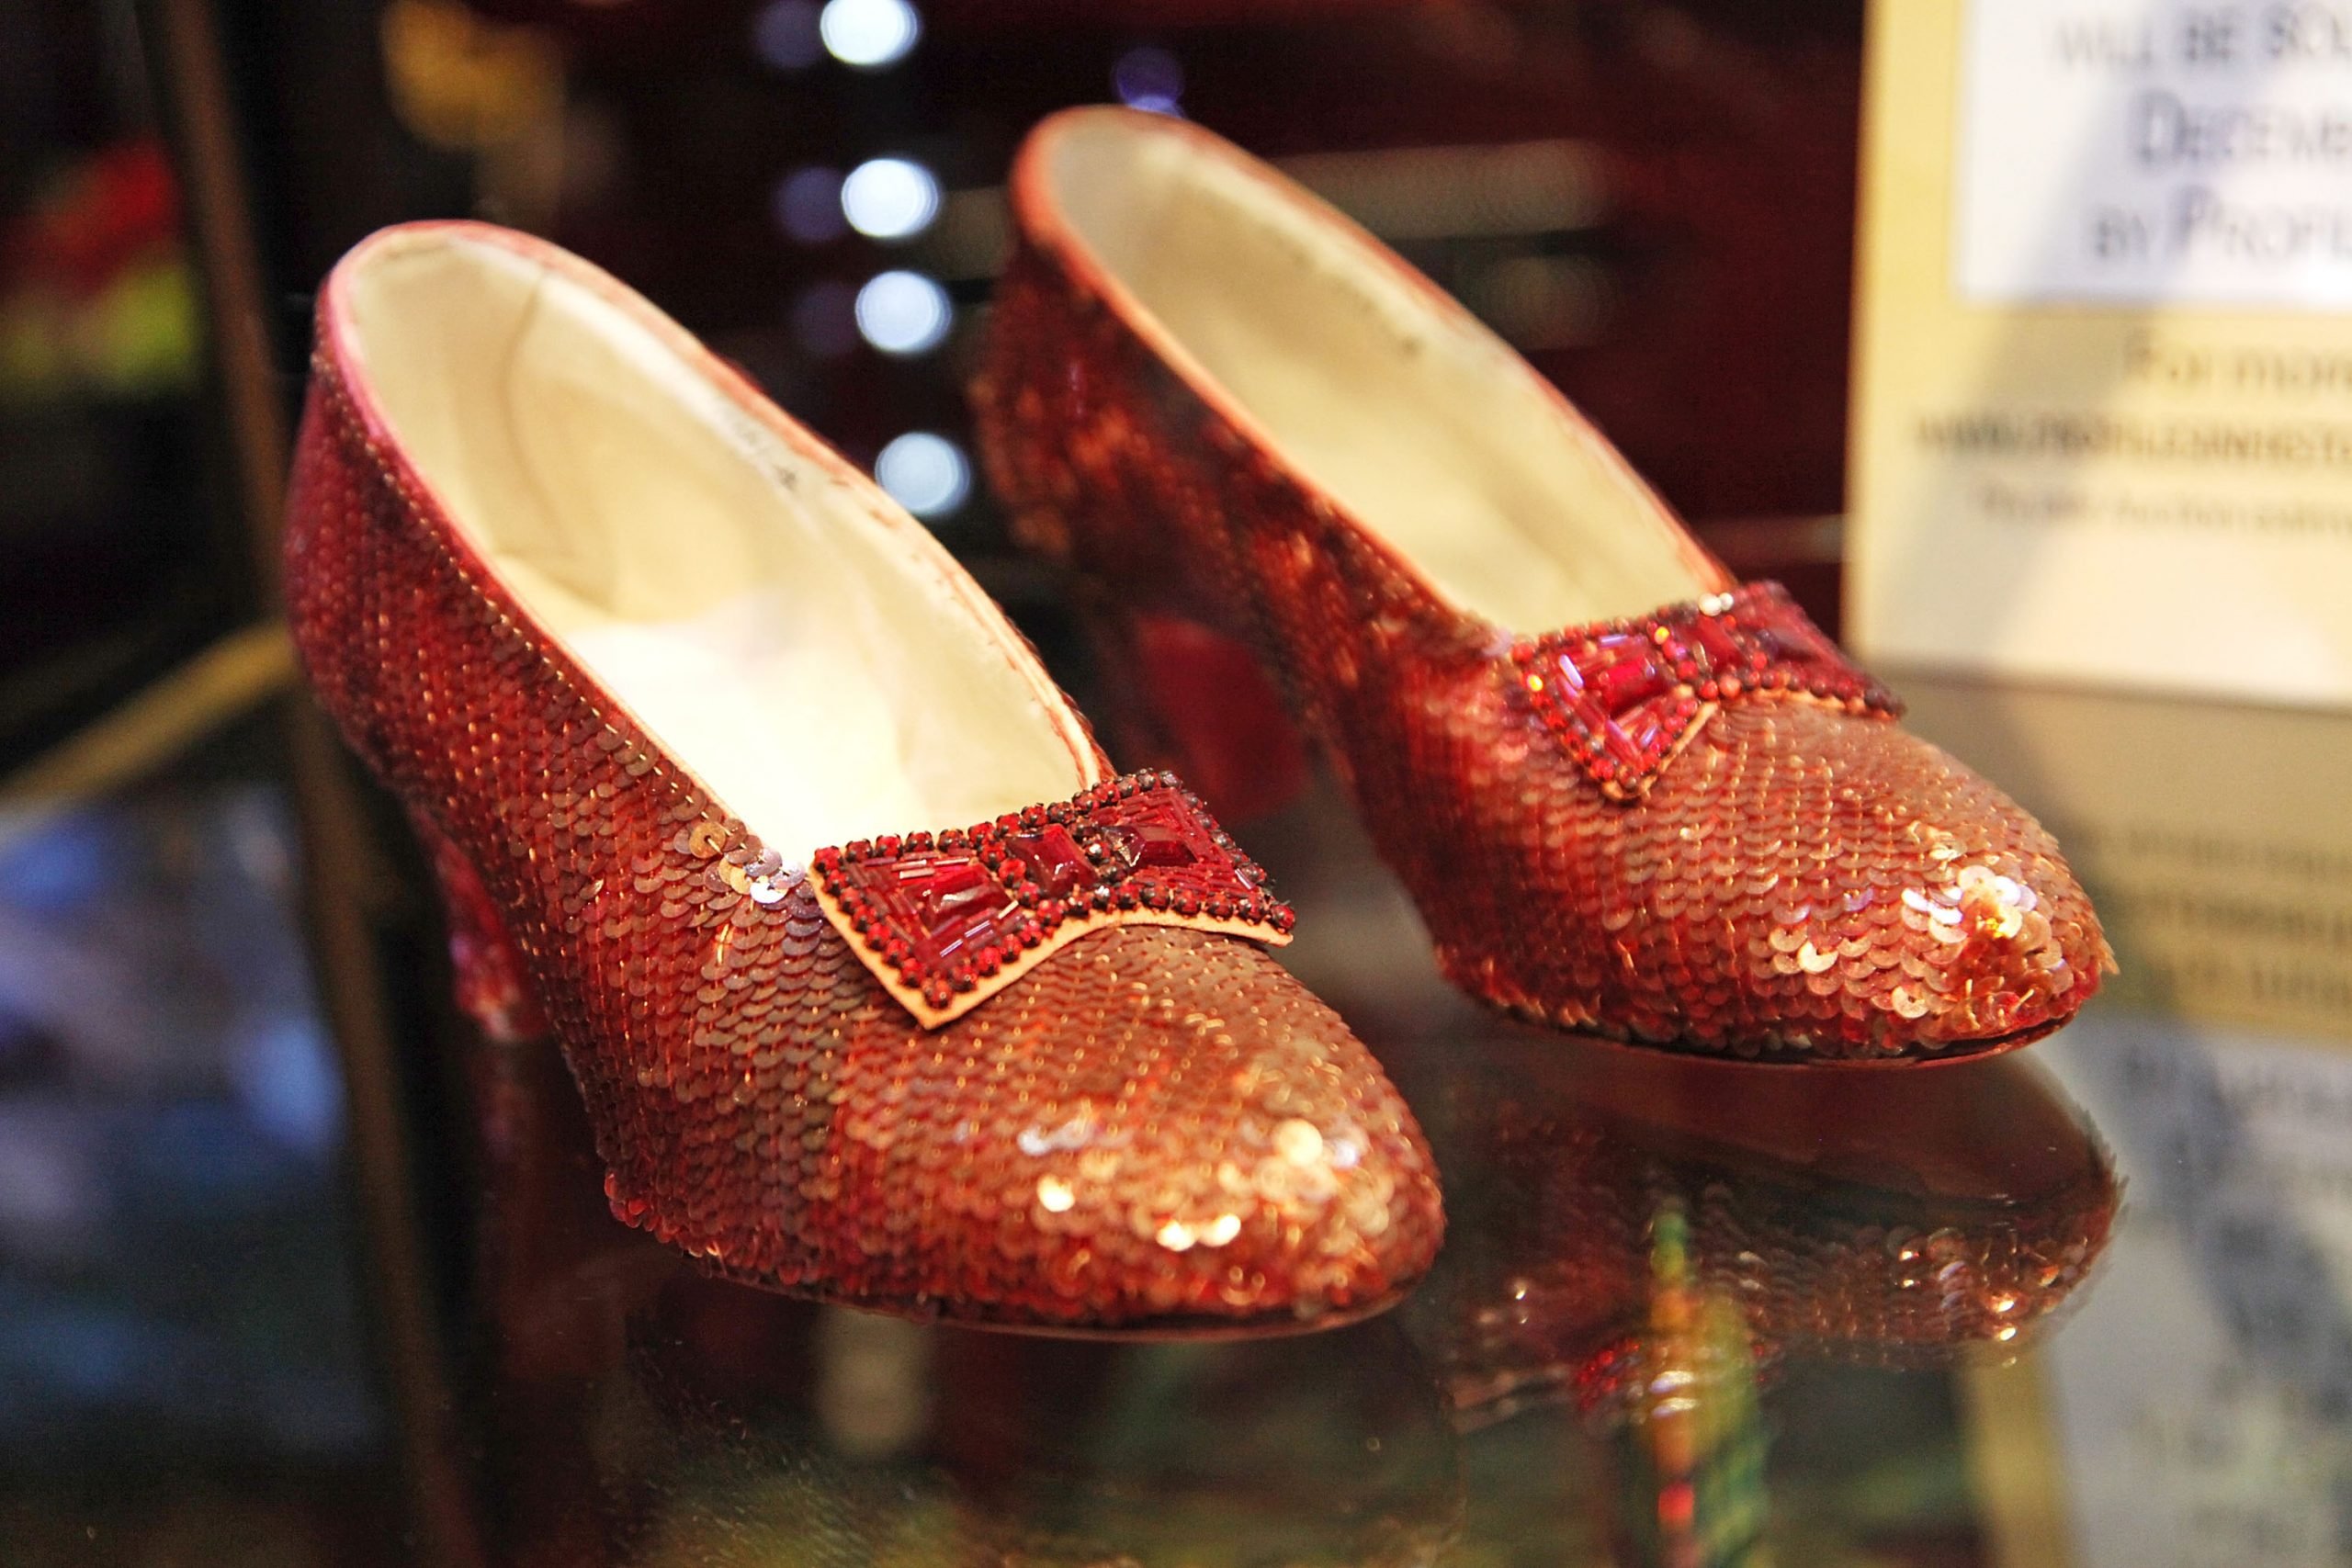 Smithsonian launches Kickstarter to preserve Dorothy's ruby slippers